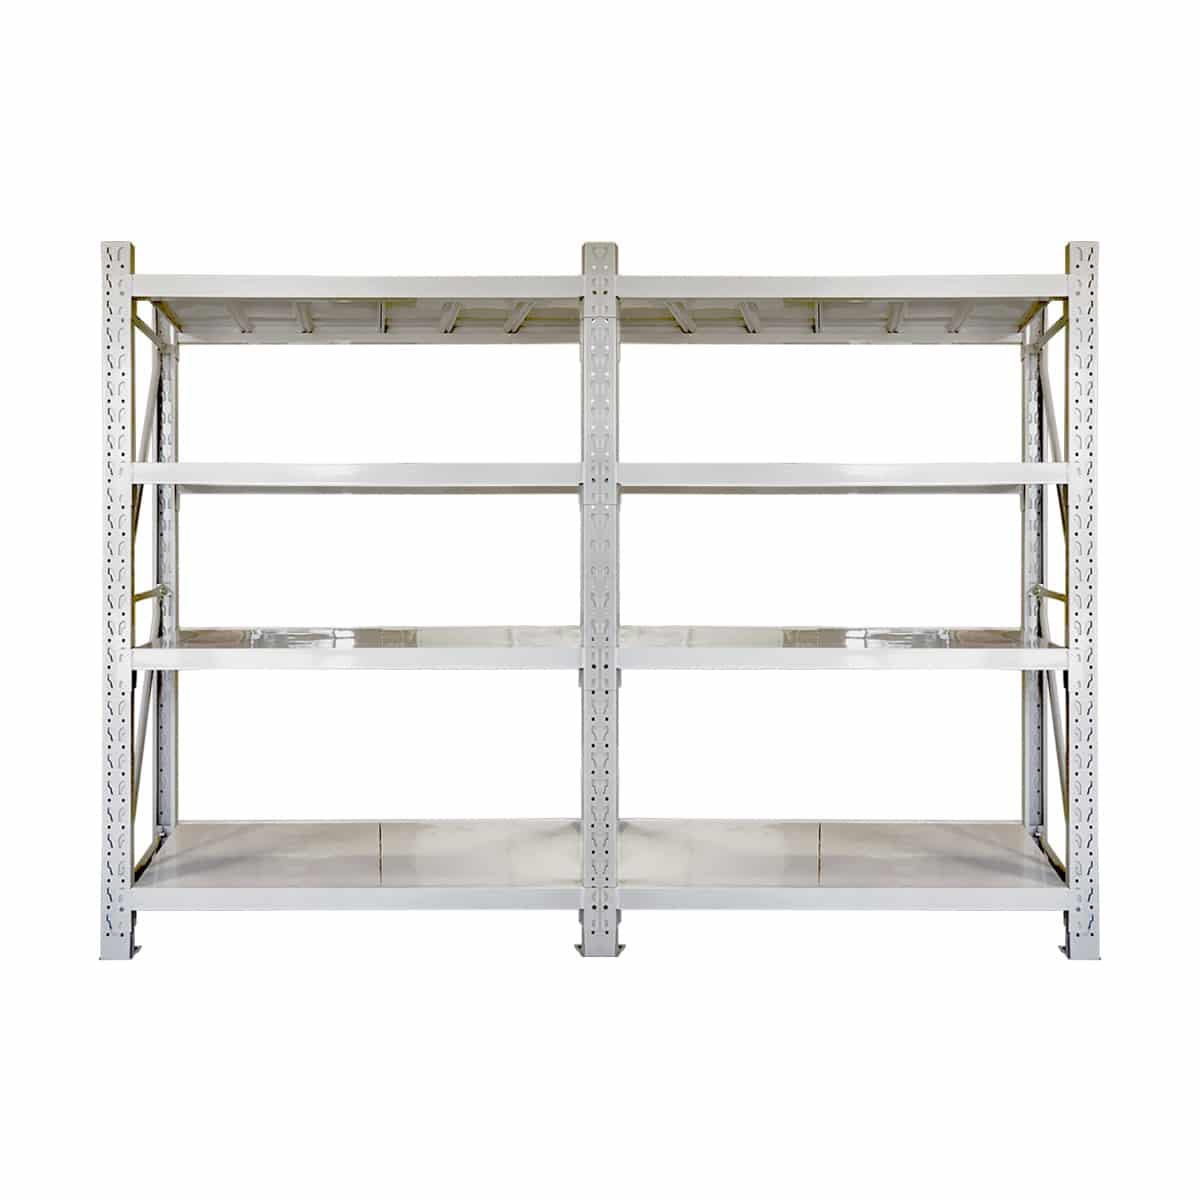 2.7m (H) x 3m (W) x 0.6m (D) 1600kg Garage Shelving For Shed